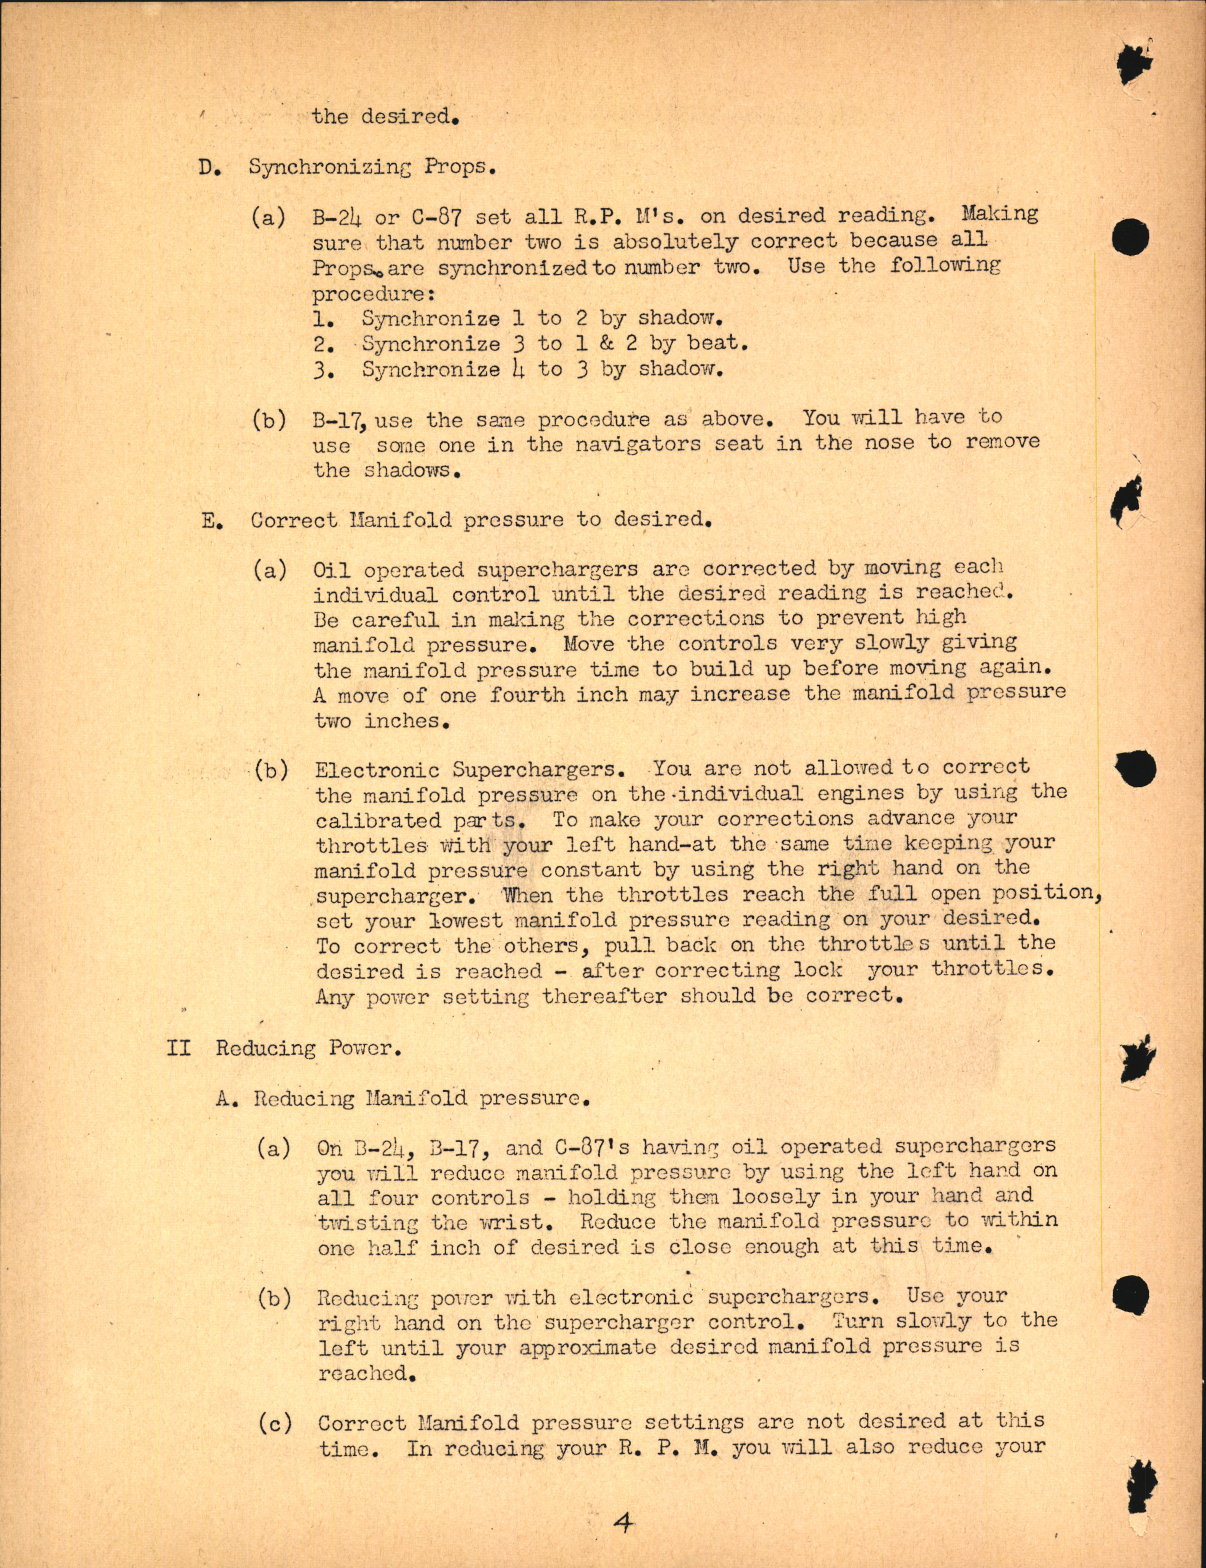 Sample page 6 from AirCorps Library document: Primary Flight Instructions for B-24, C-87, and B-17, Flight Engineer Division